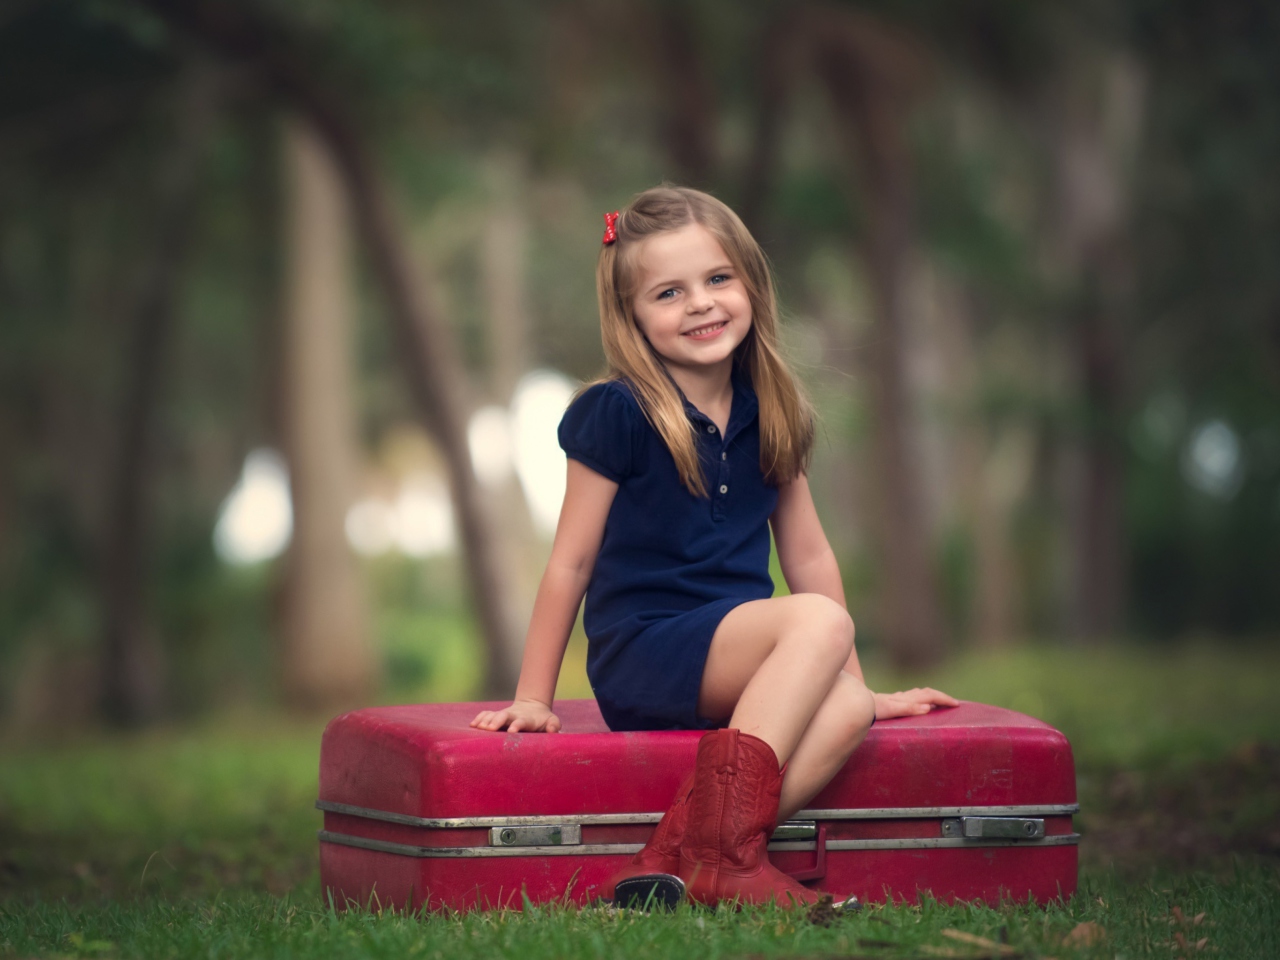 Das Little Girl Sitting On Red Suitcase Wallpaper 1280x960